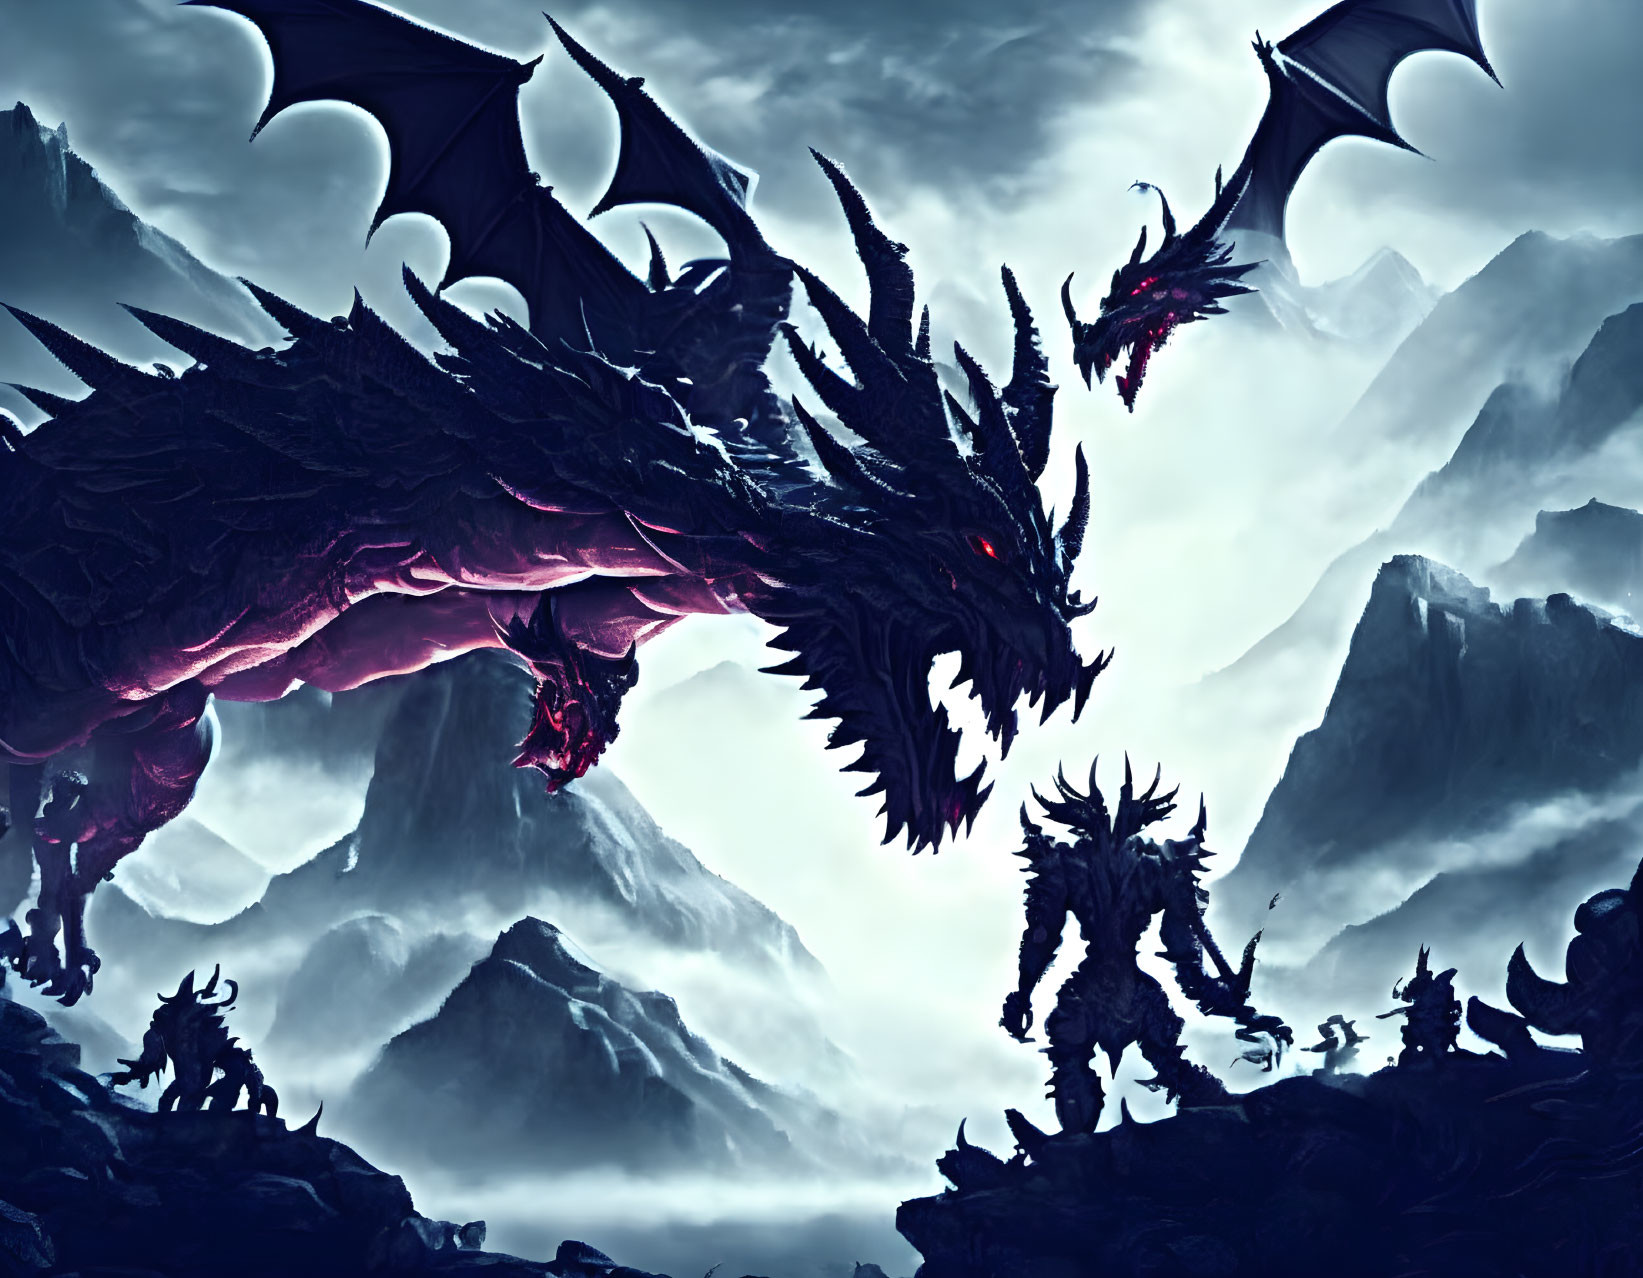 Multiple dragons in misty mountain scene with glowing red-eyed large dragon